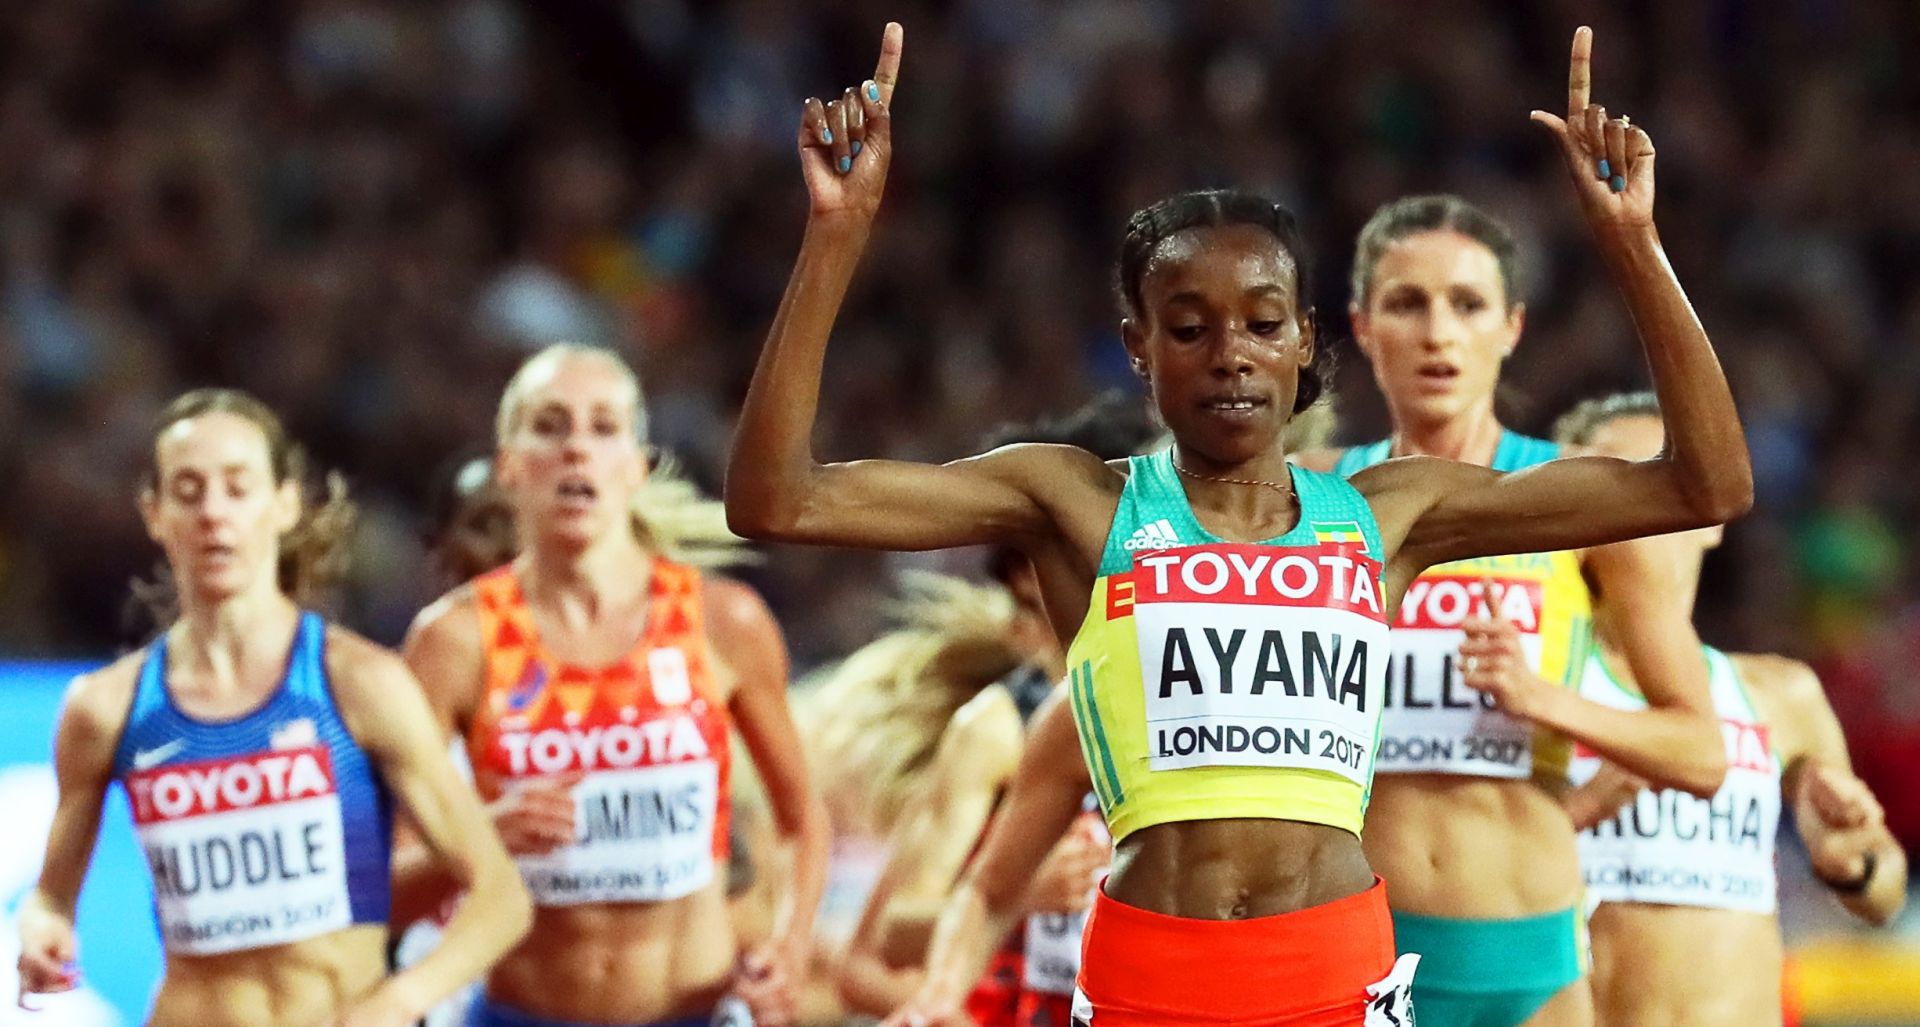 epa06127089 Ethiopia's Almaz Ayana (front) reacts while crossing the finish line to win the women's 10,000m final at the London 2017 IAAF World Championships in London, Britain, 05 August 2017.  EPA/SRDJAN SUKI